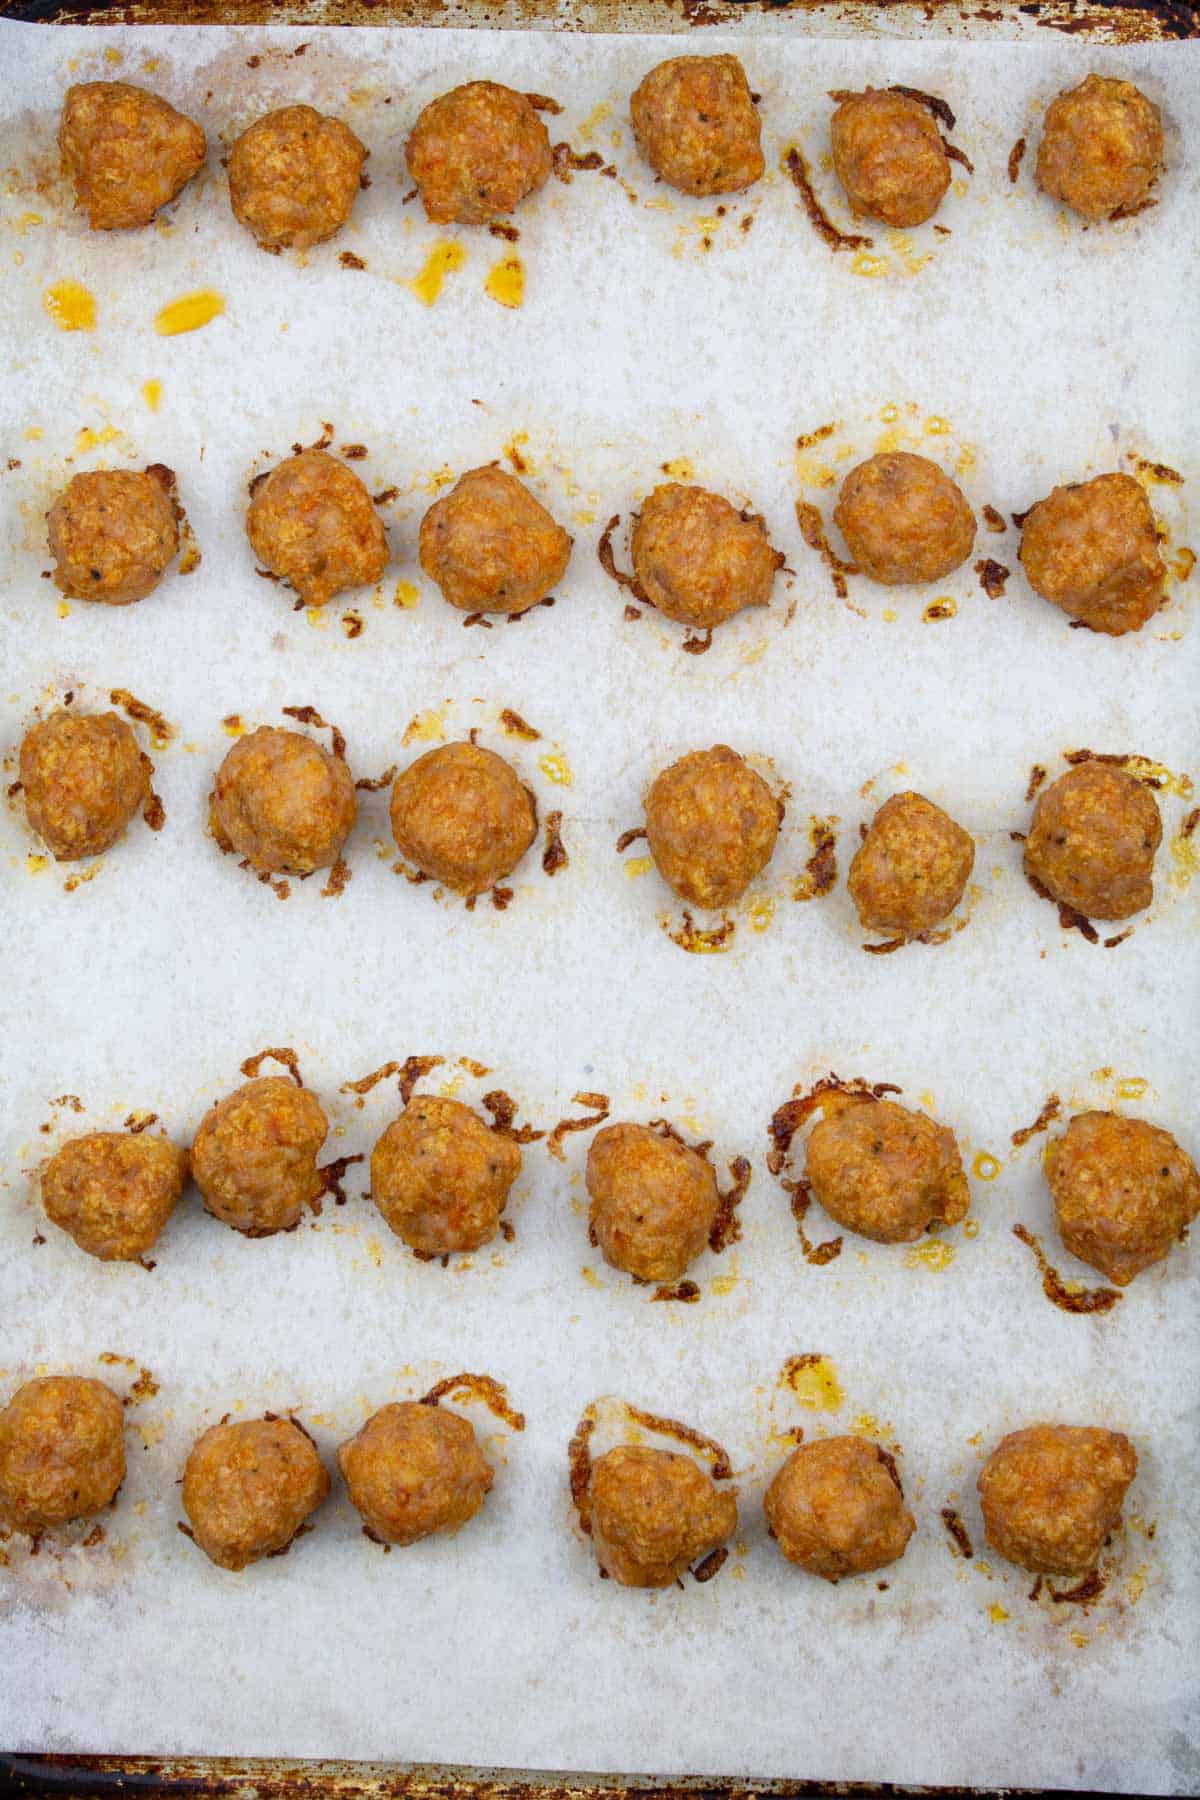 Juicy baked chicken meatballs after cooking in onion lined up on parchment-lined sheet pan.